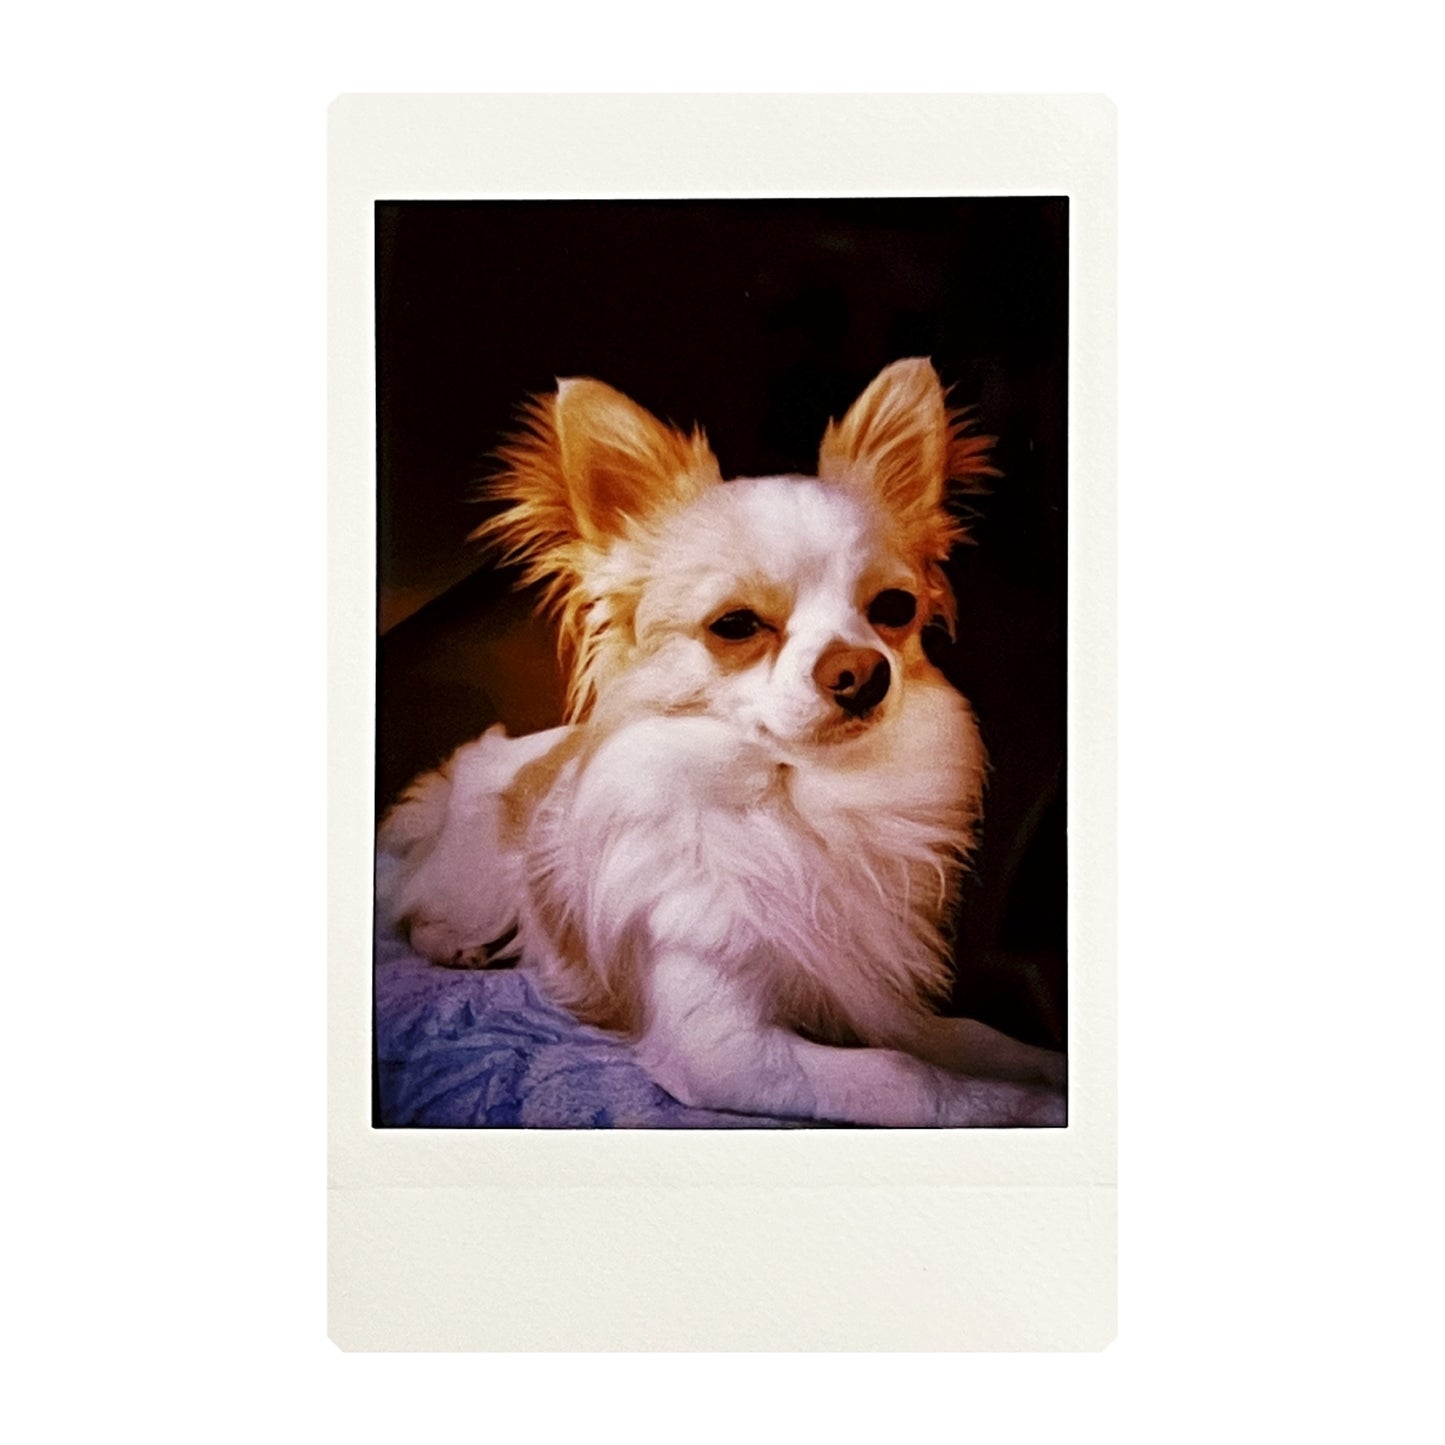 Double exposure instant photo of the dog made with Jollylook EYE